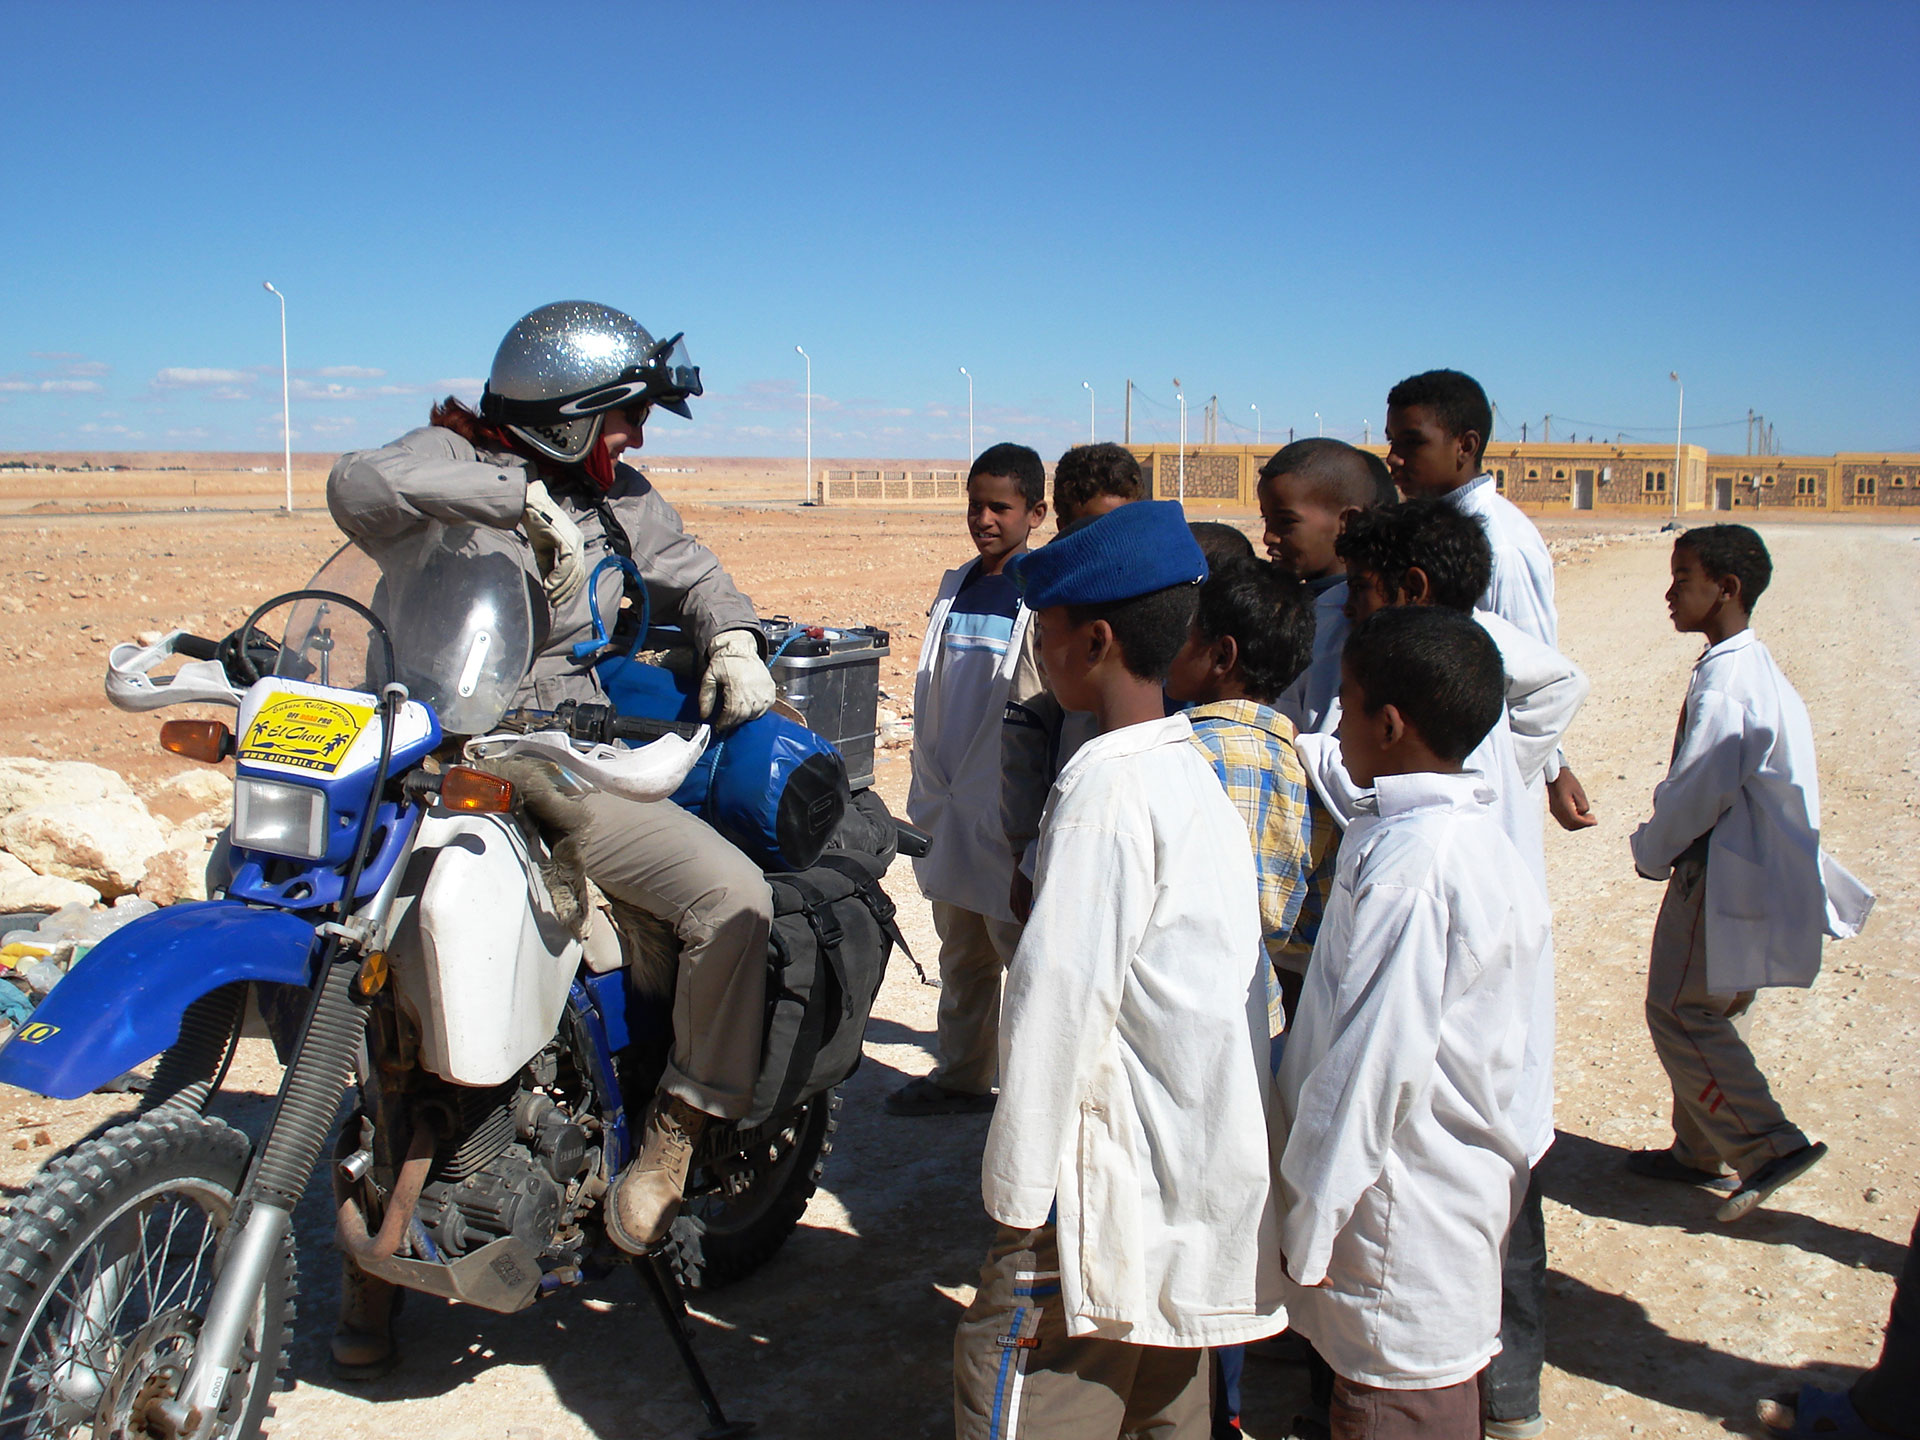 Motorcycle adventurer Lois Pryce in Algeria on her bike talking to a group of children